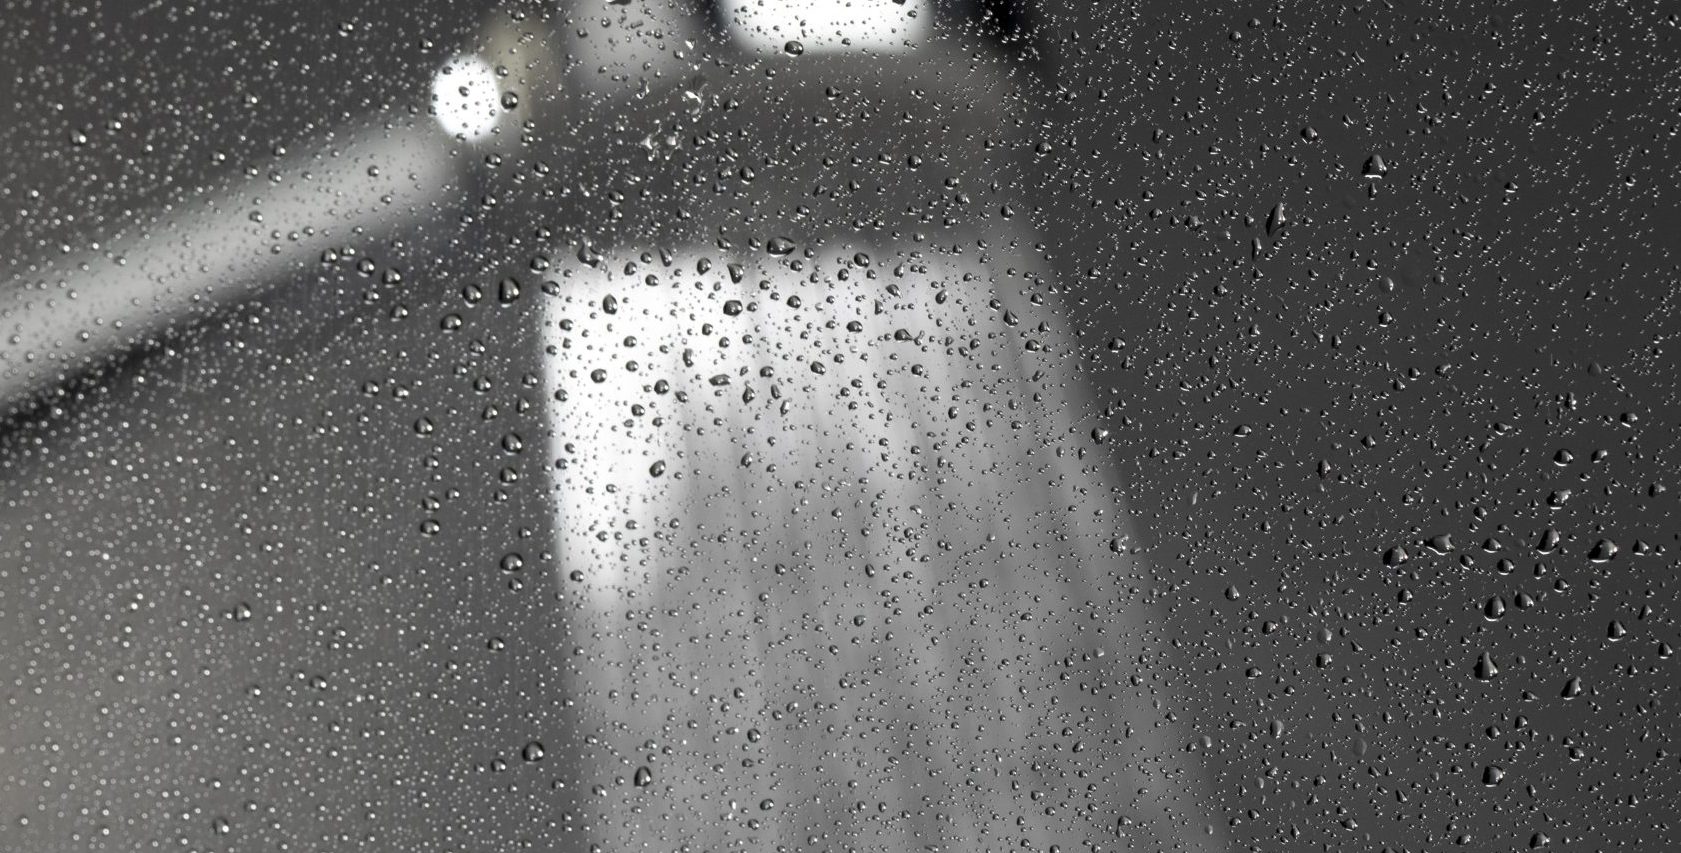 7 shower habits that harm your body 